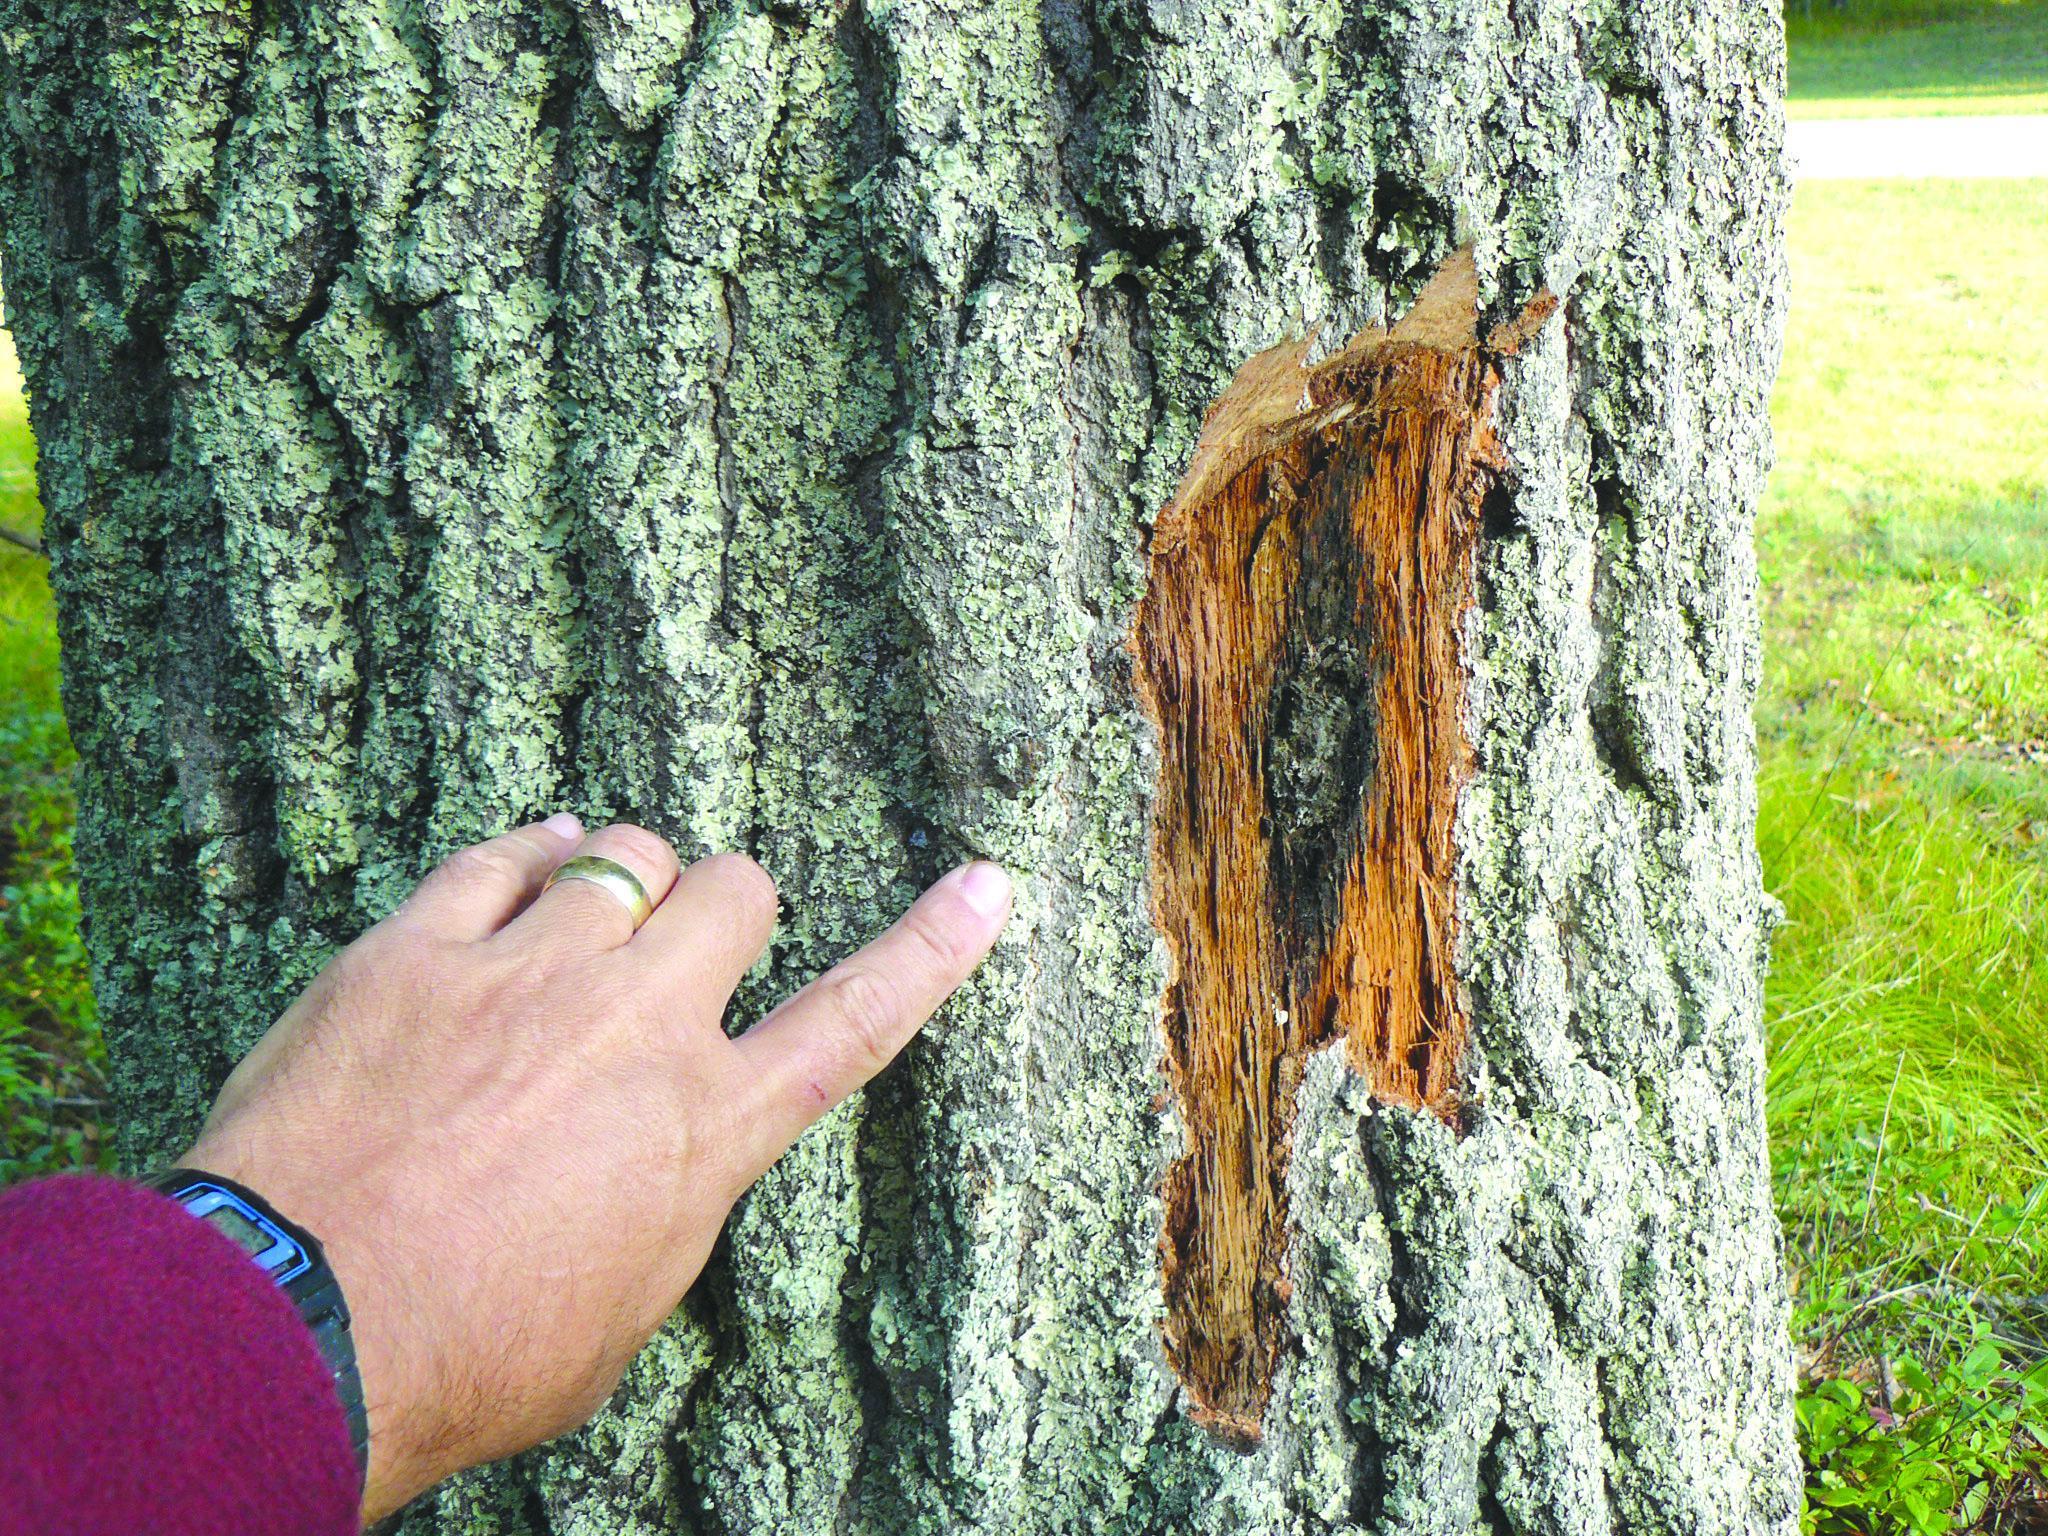 Wither thou wilt: Strategies for safeguarding tree health